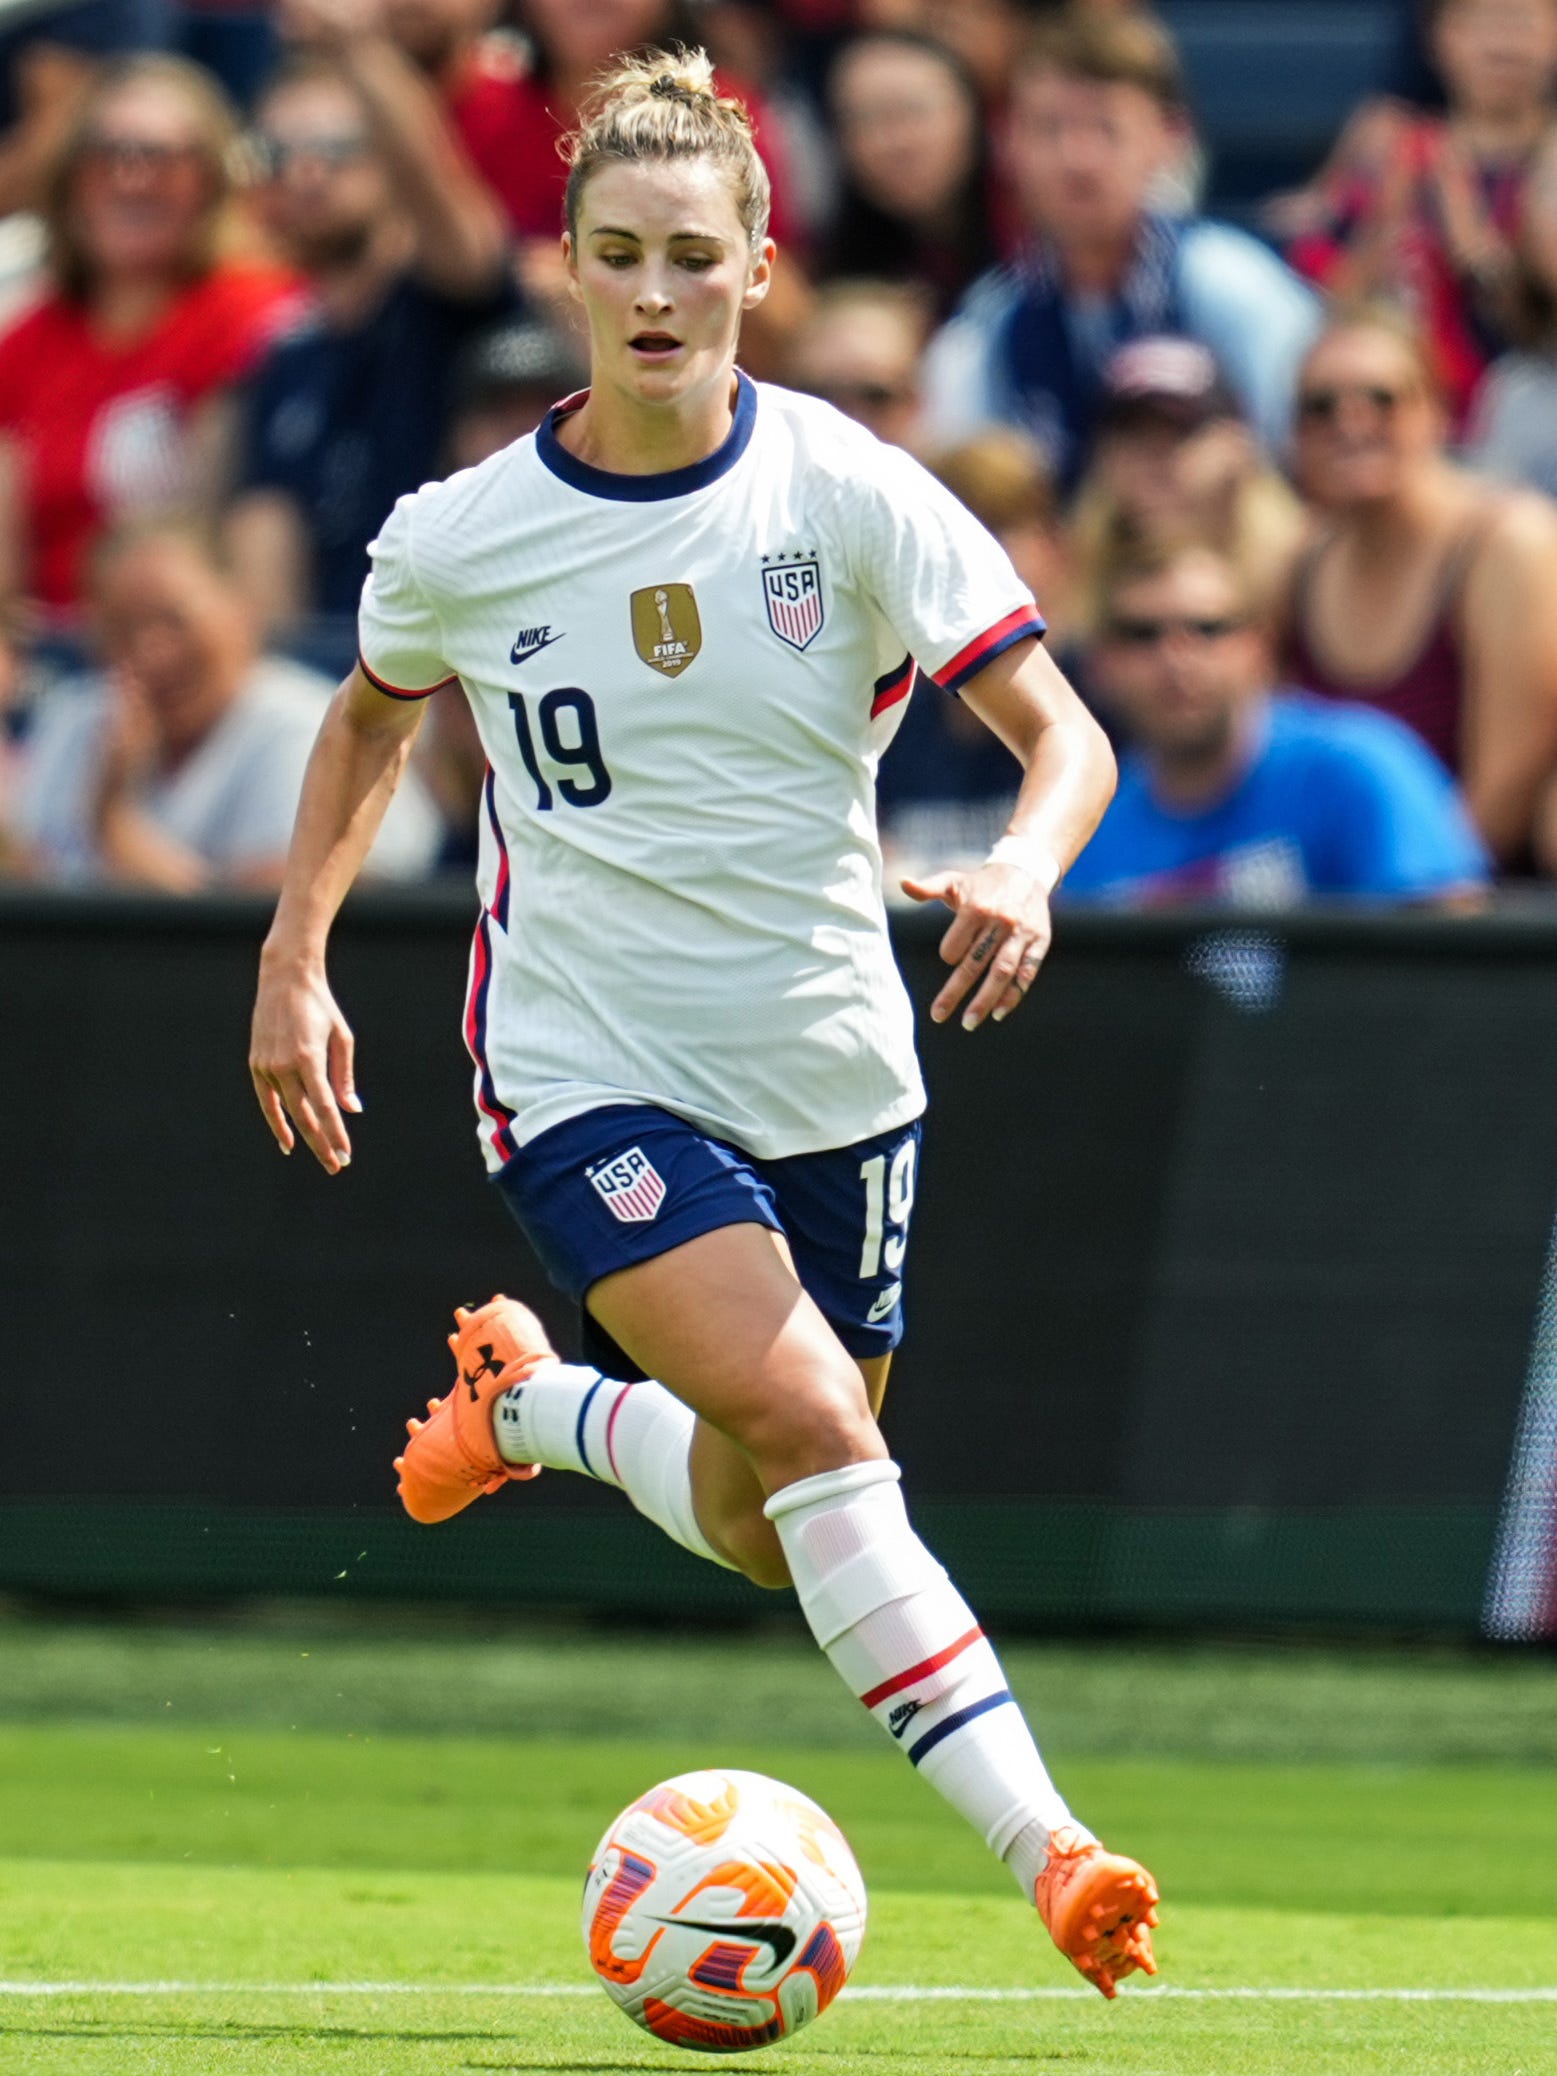 An action image of Emily Fox playing soccer.